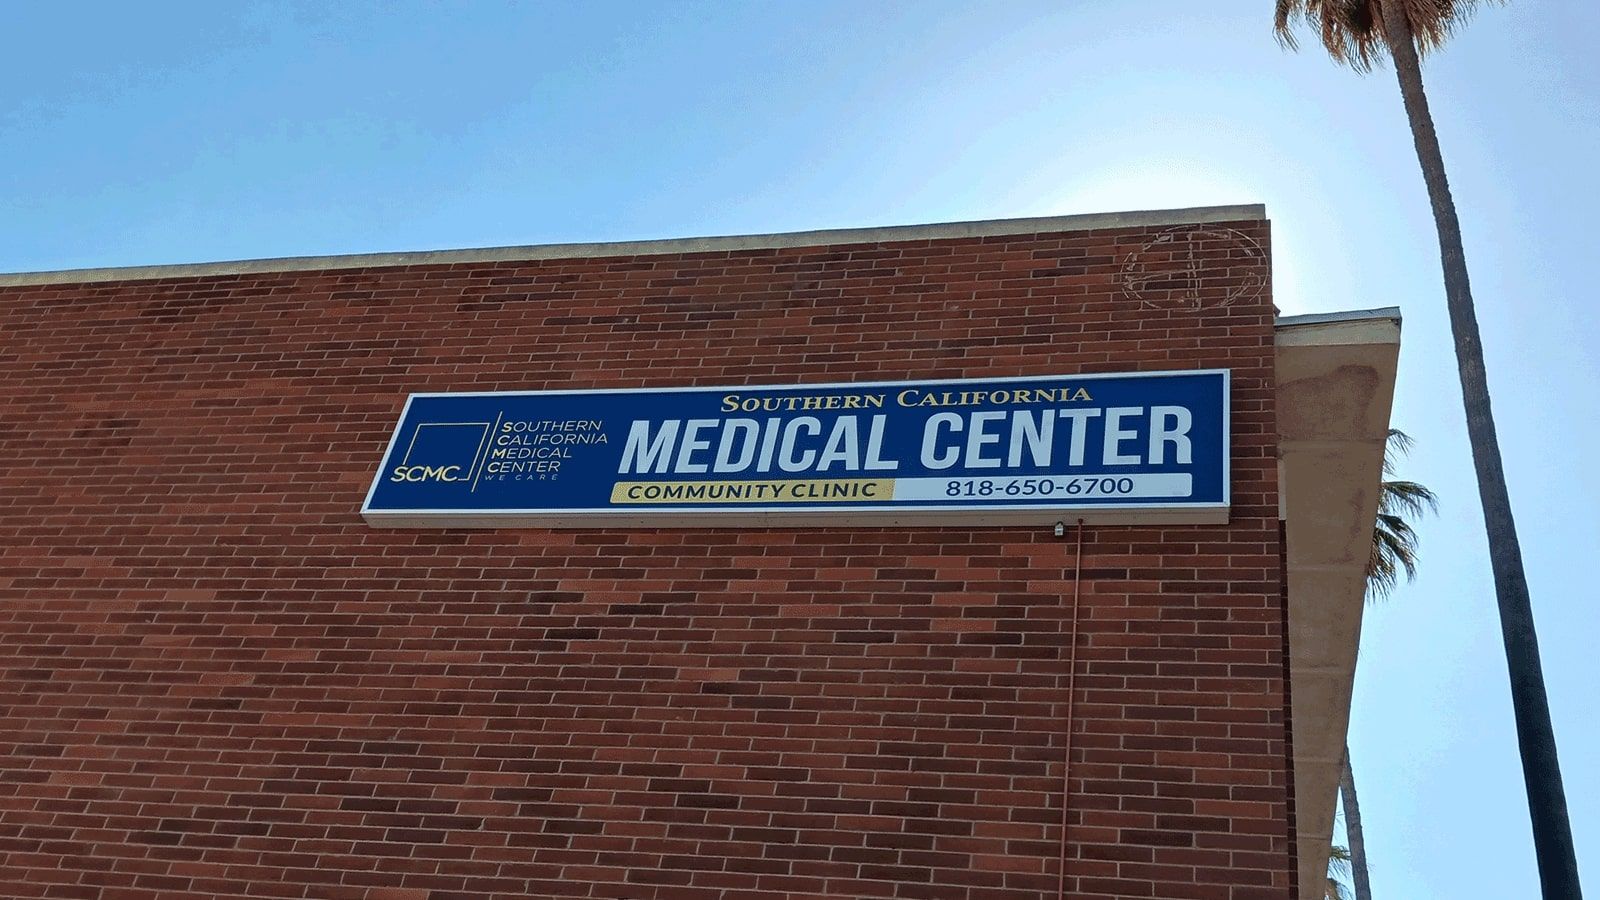 Southern California Medical Center outdoor sign on the wall